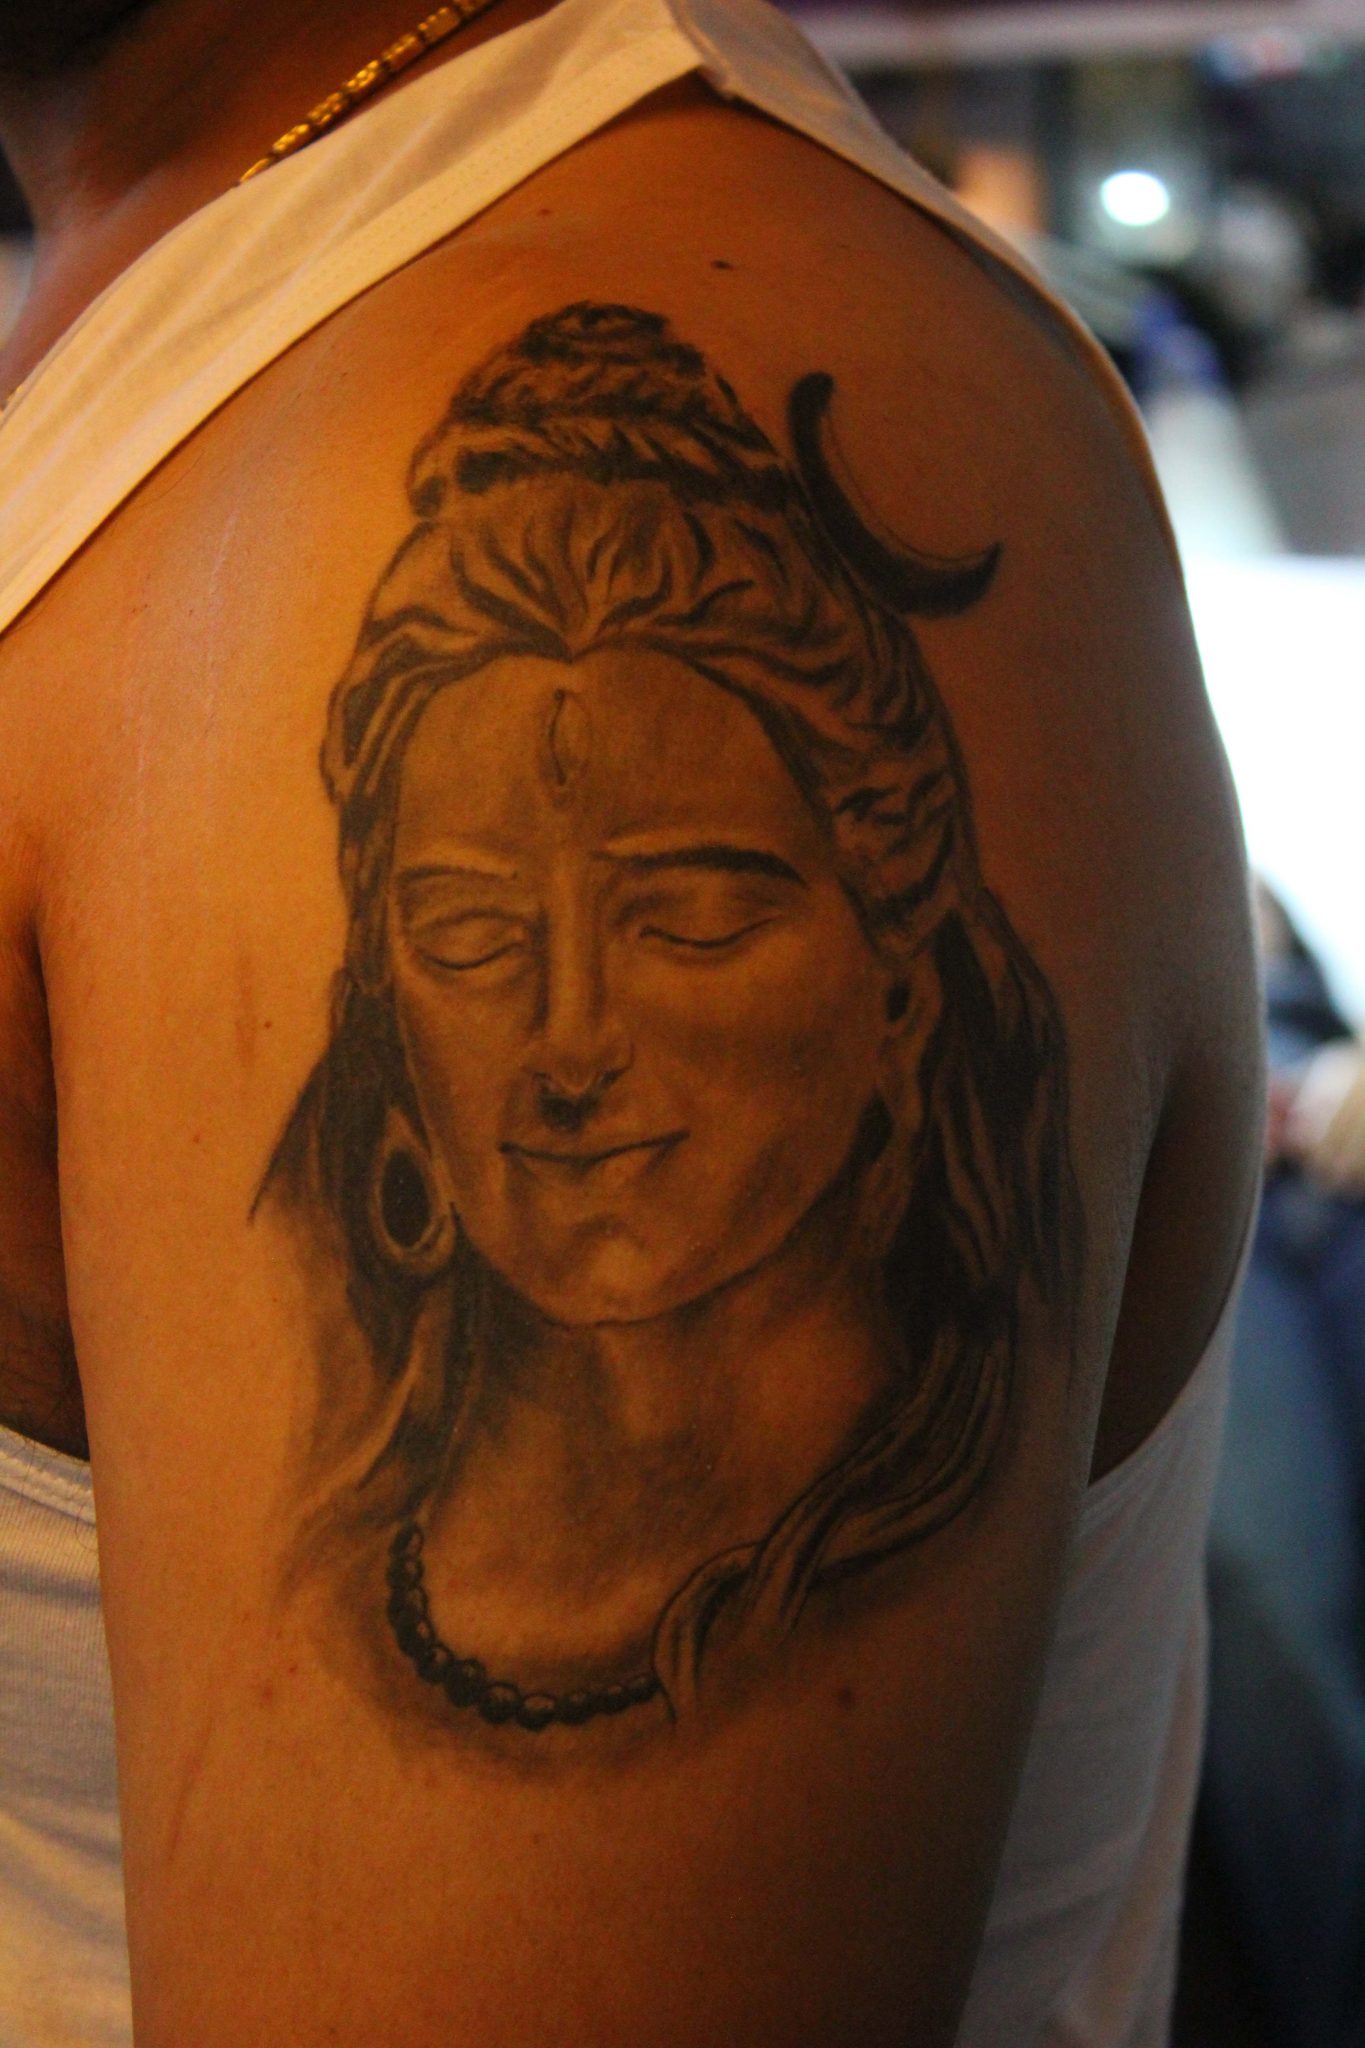 50 Shiva Tattoo Design Ideas and Placements - Tattoo Me Now